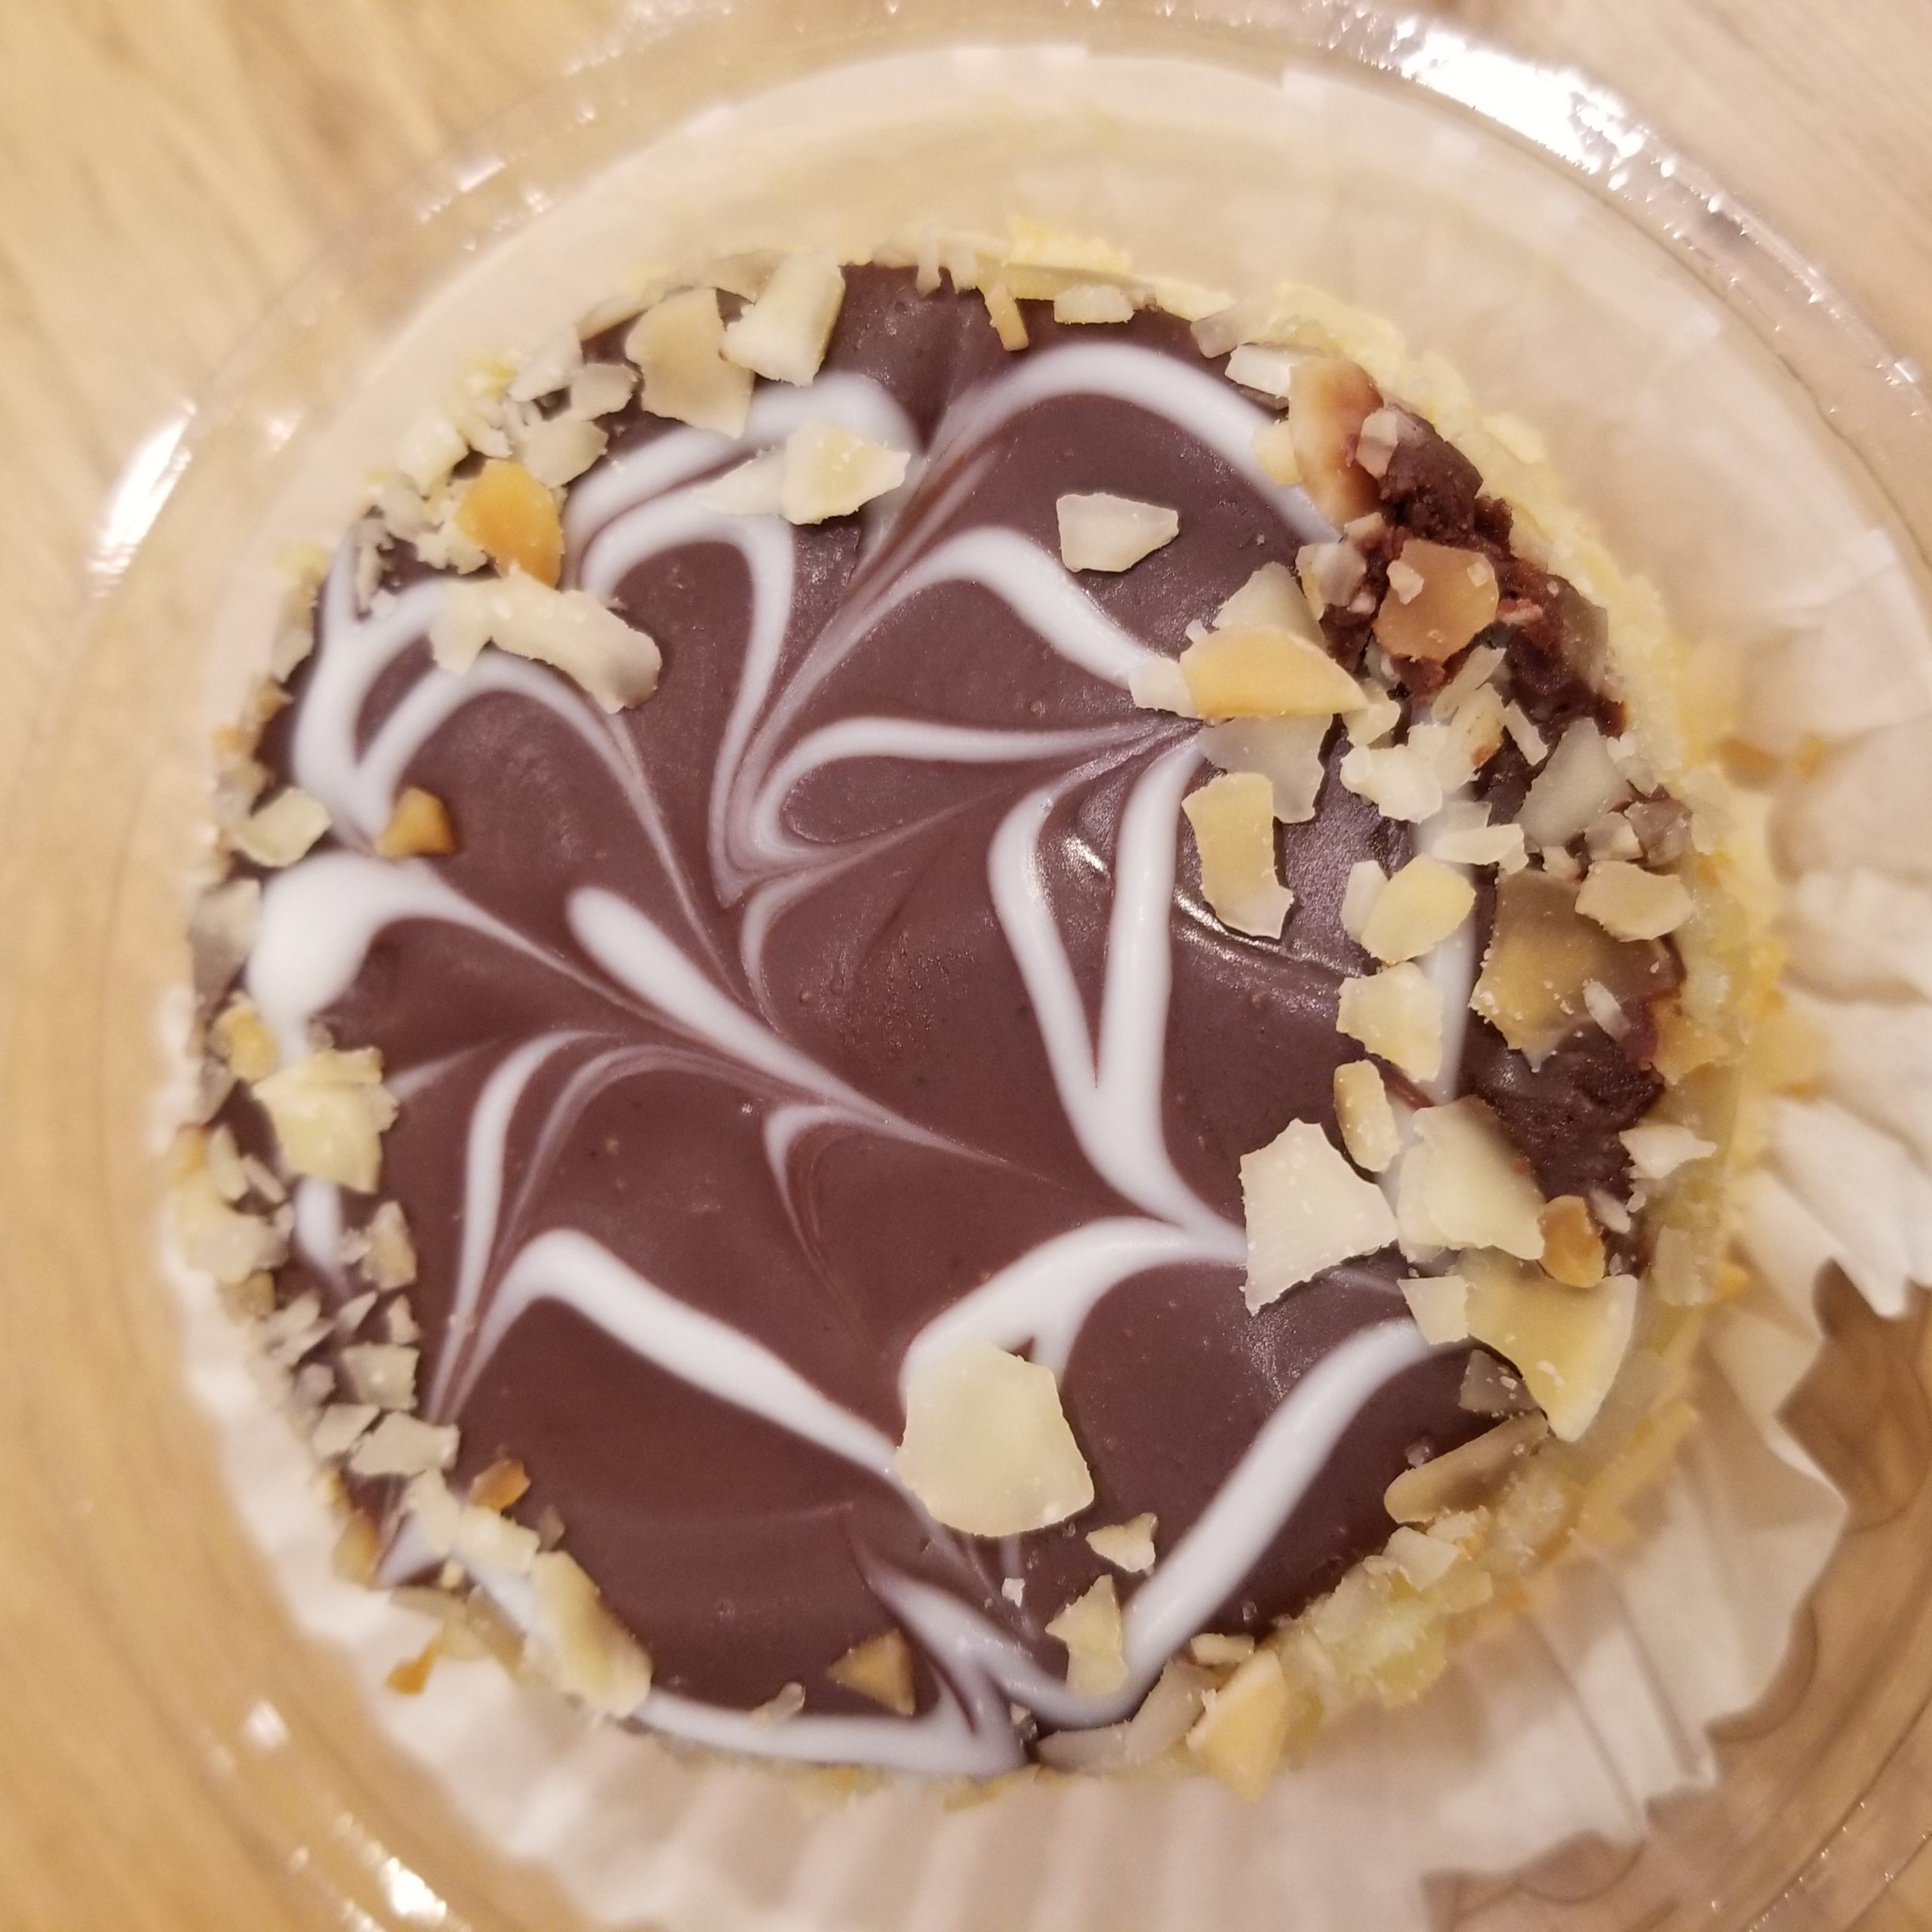 When in Boston, you have to try a Boston Cream Pie!